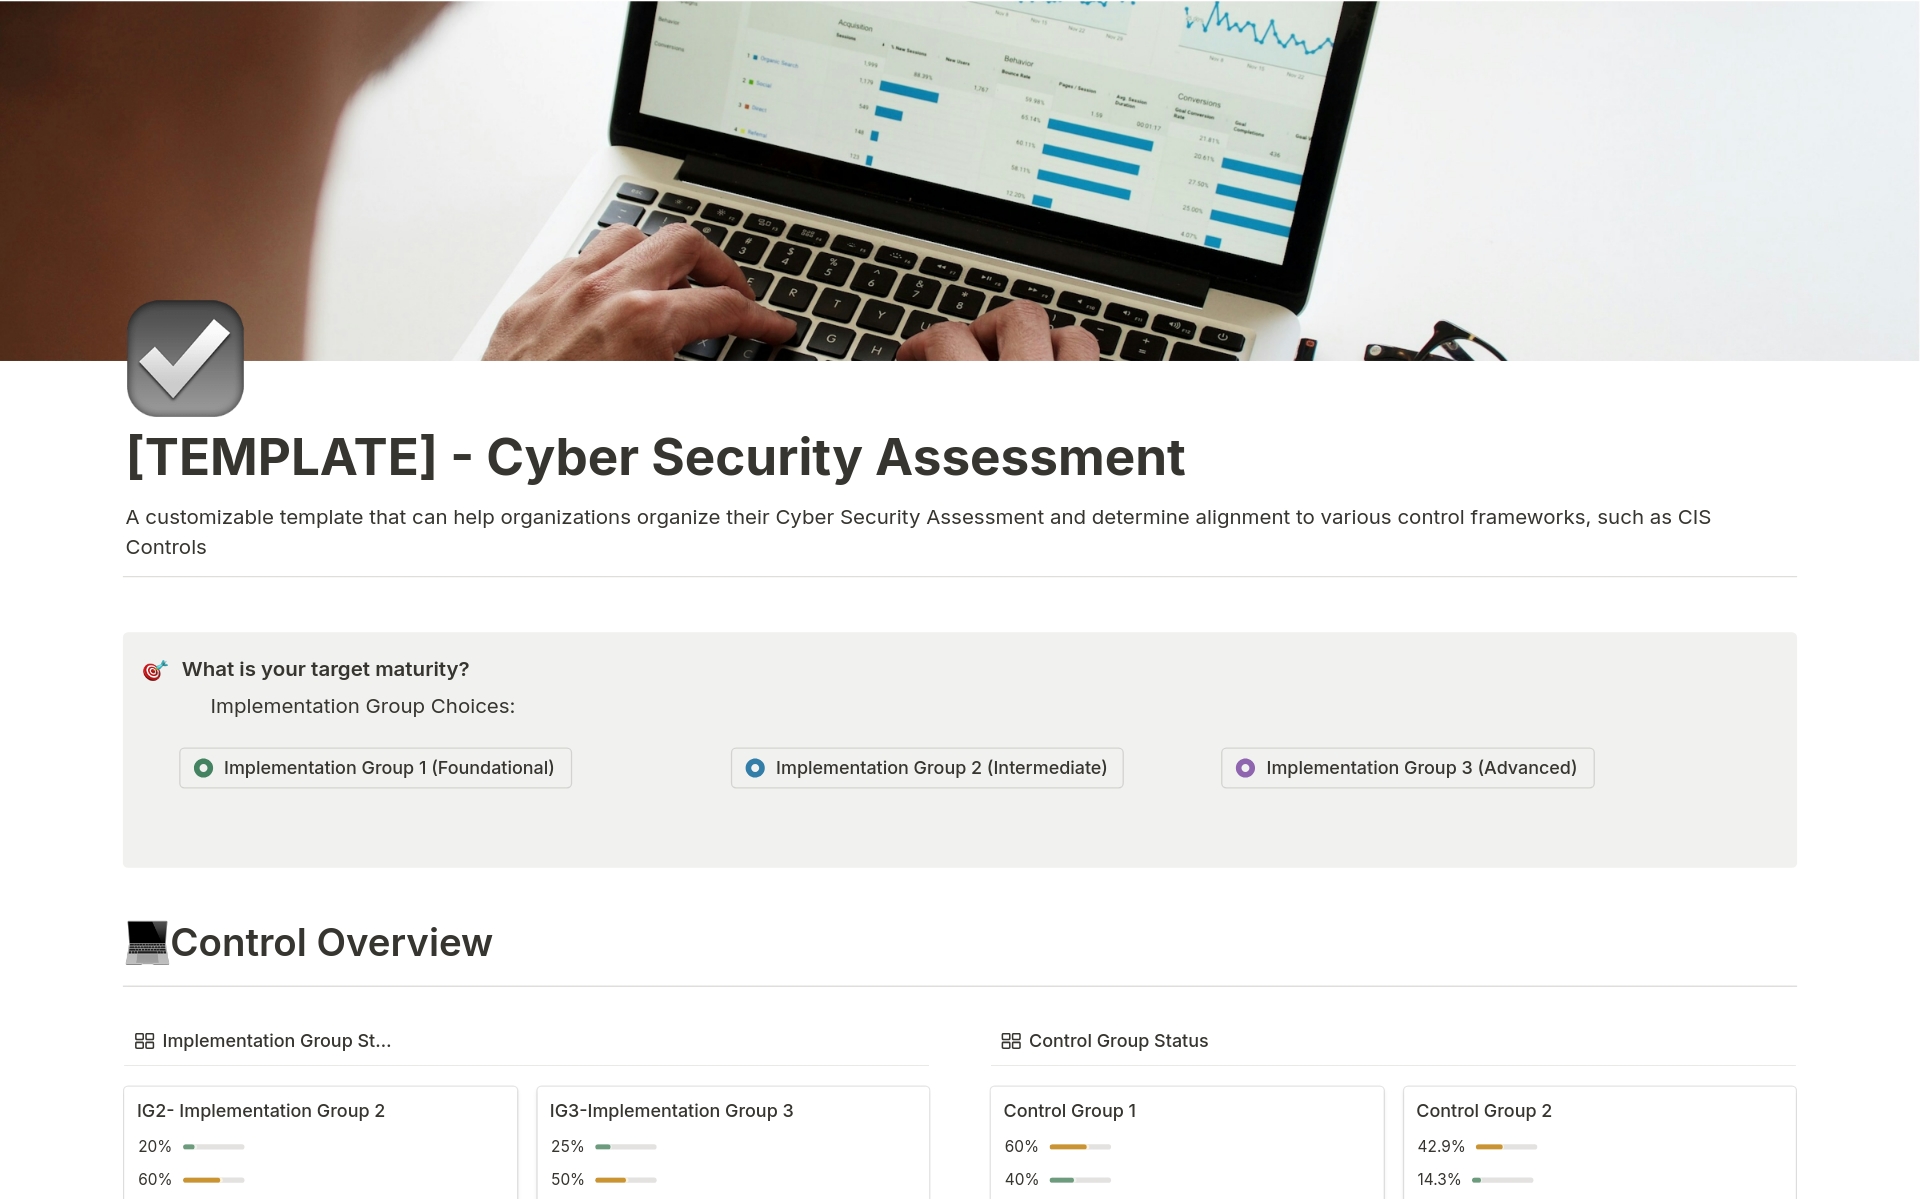 A customizable template that can help organizations organize their Cyber Security Assessment and determine alignment to various control frameworks, such as CIS Controls